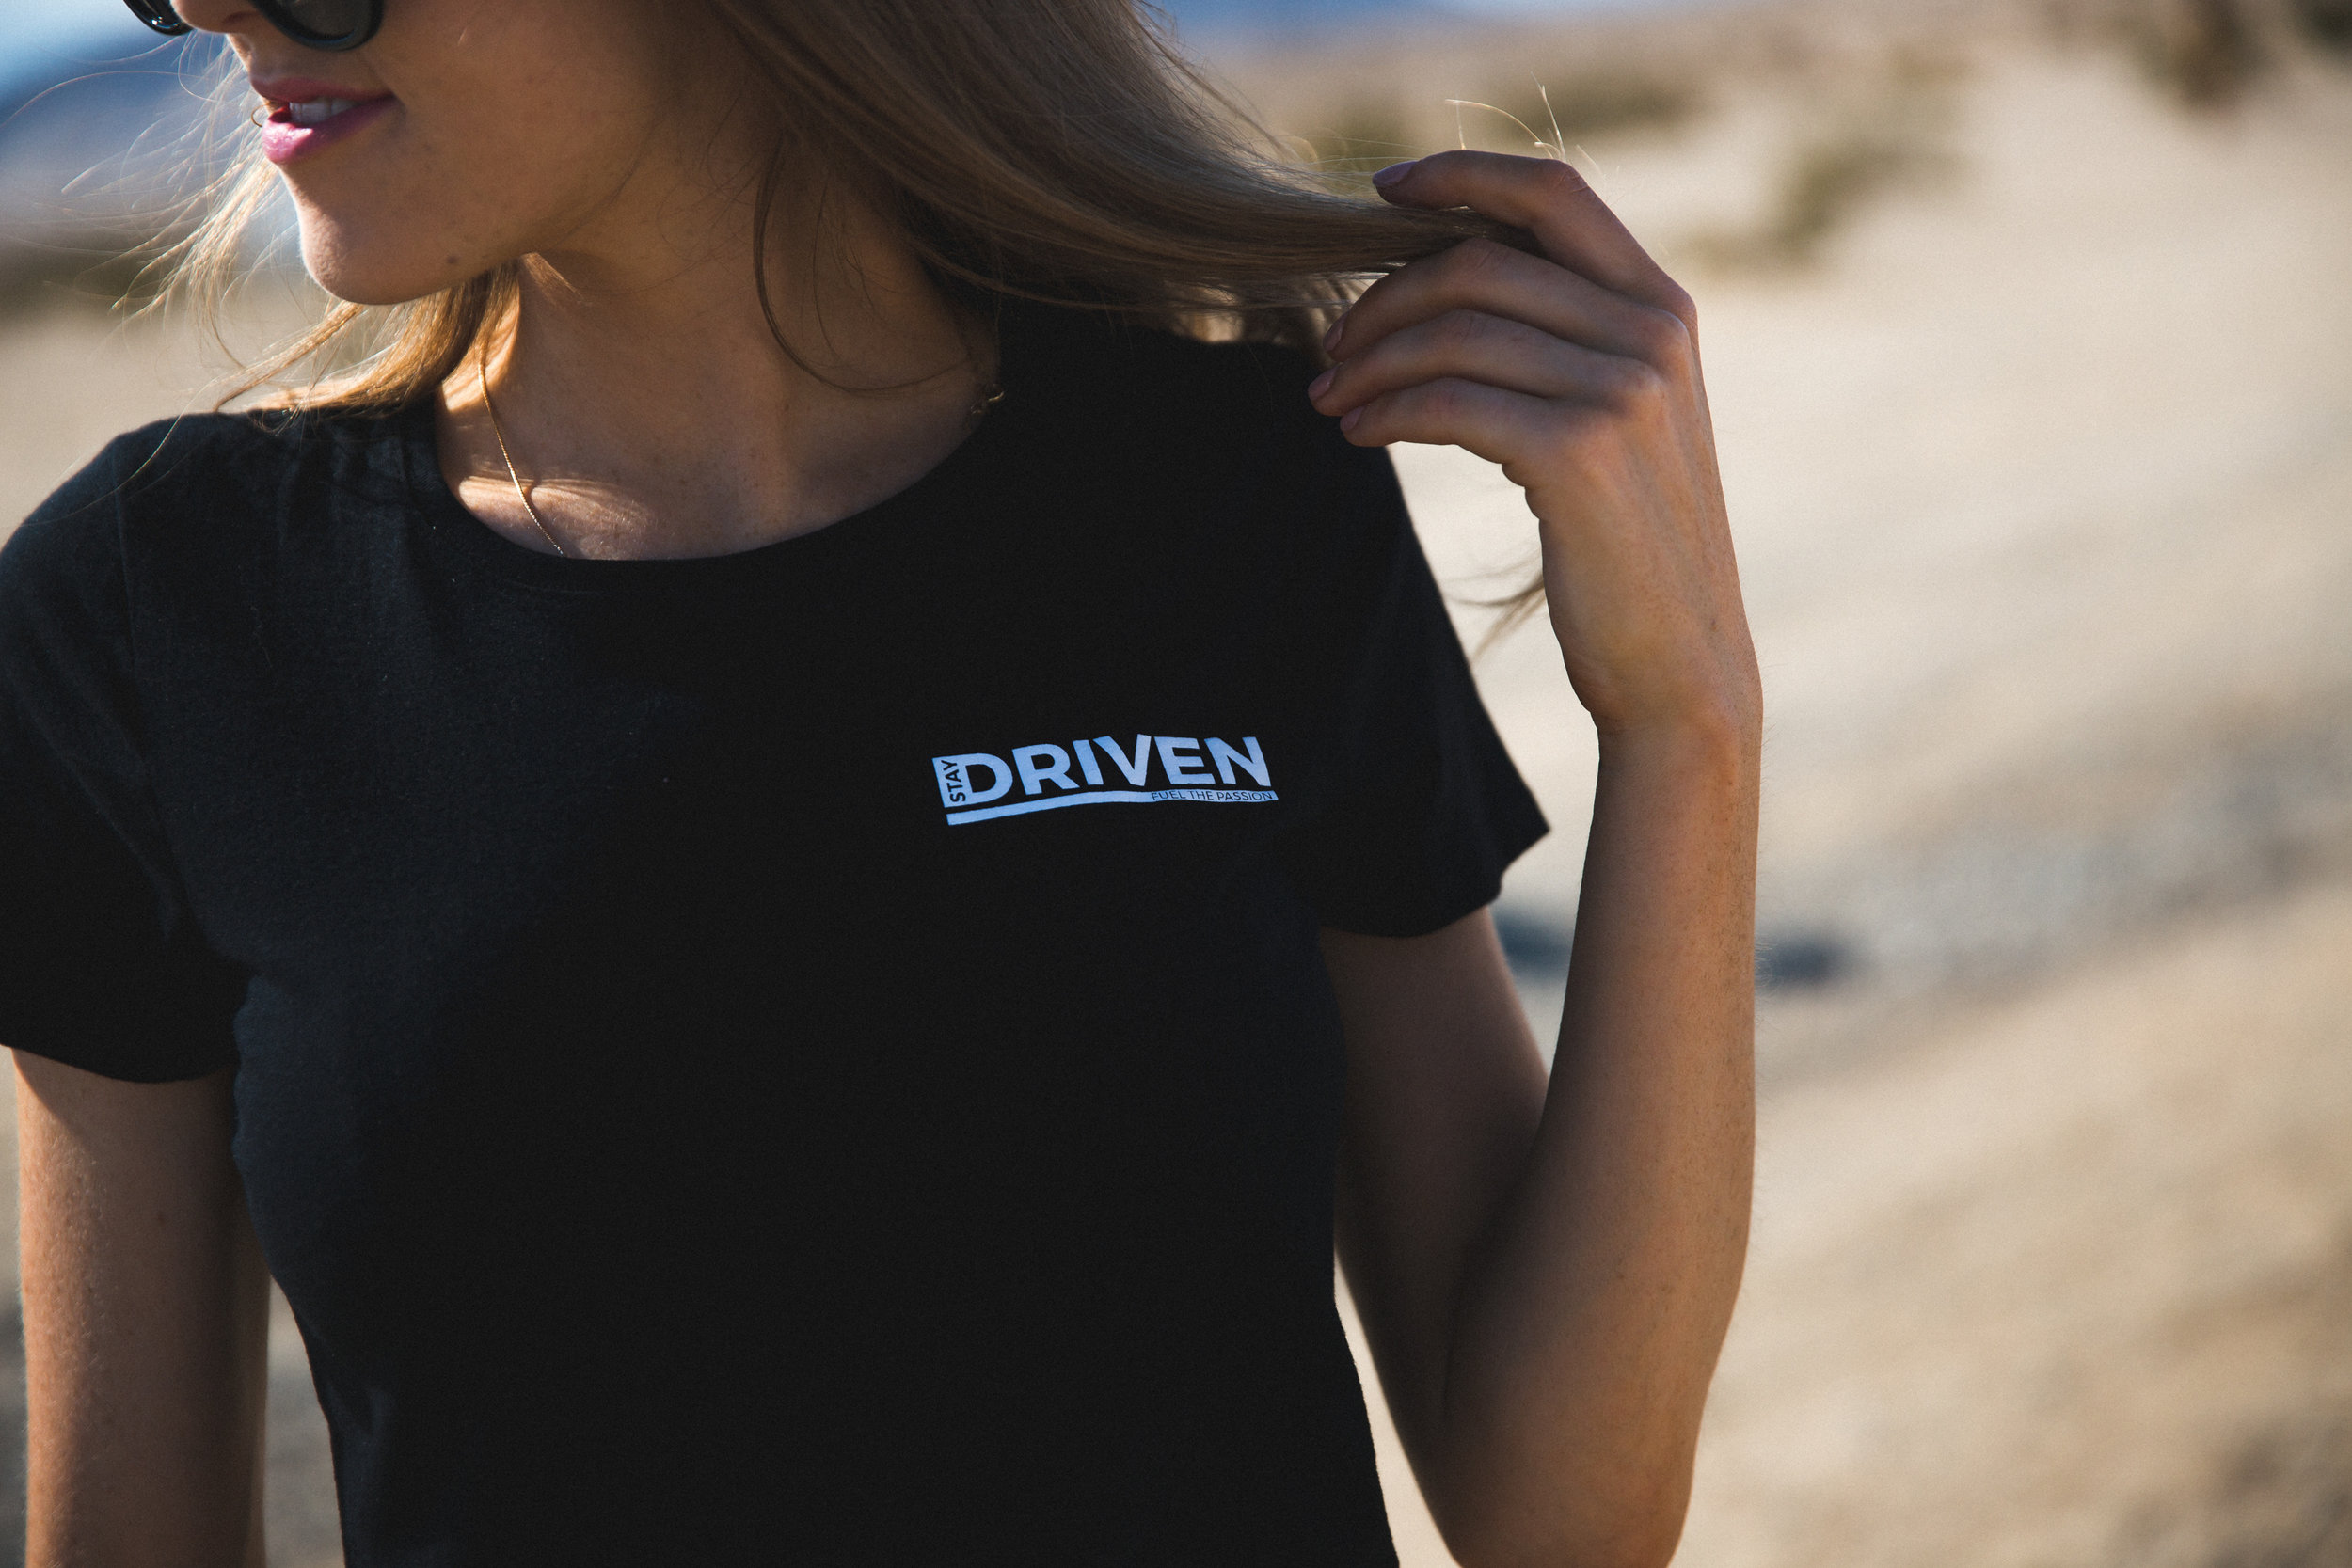 Stay_Driven_FTP_Cropped-1.jpg